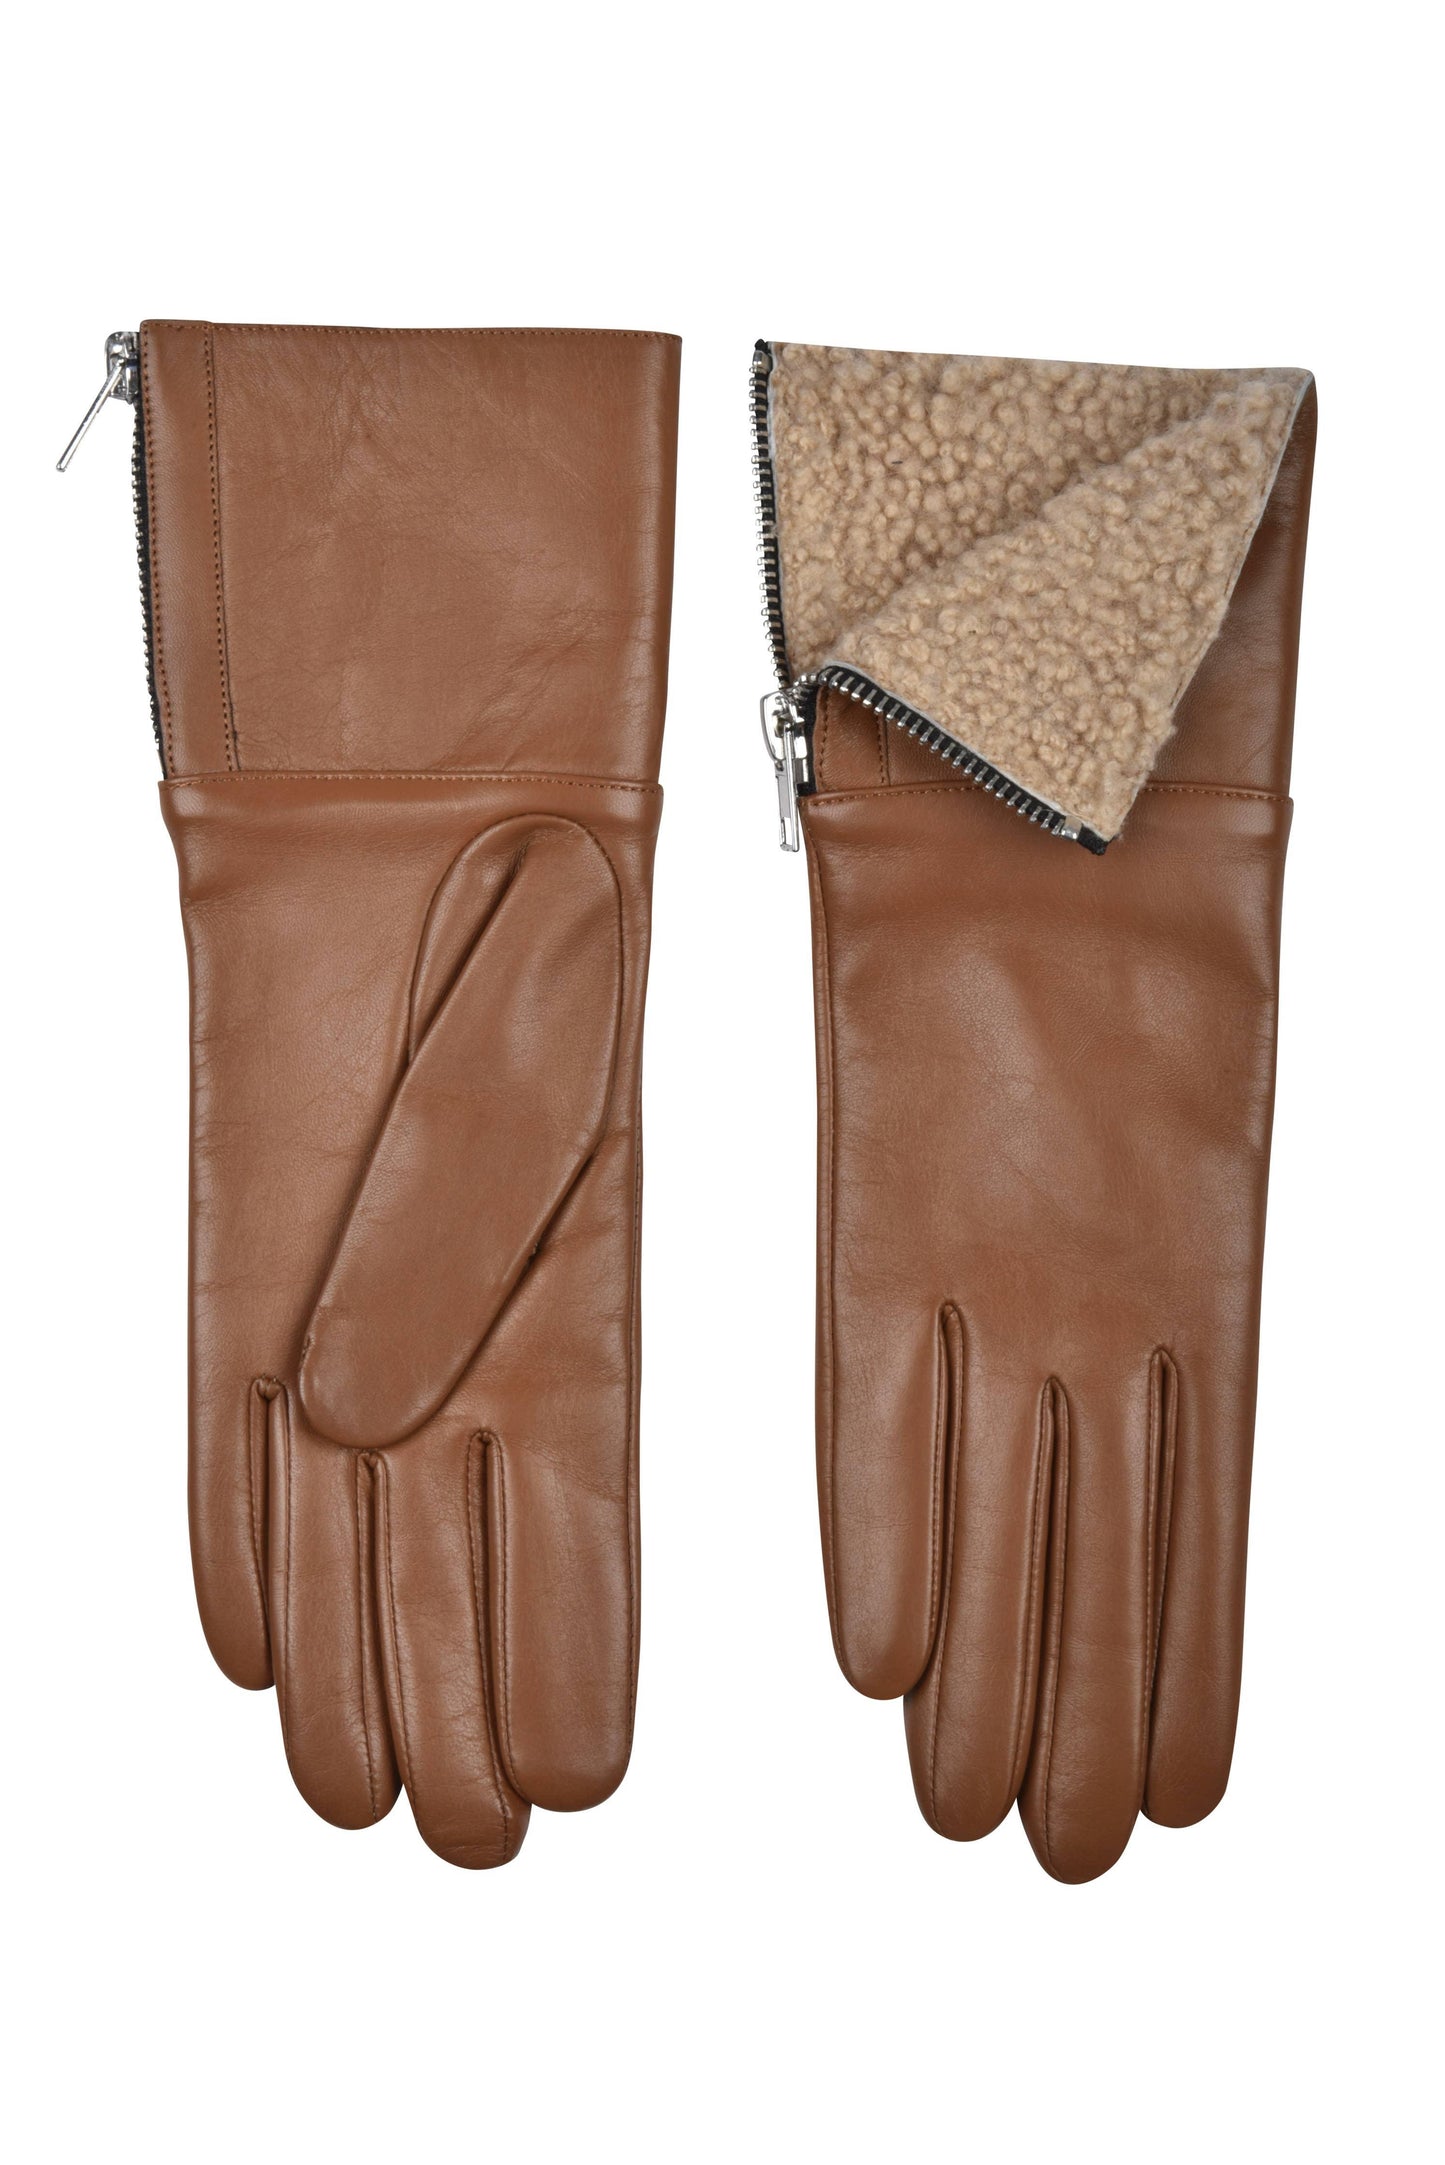 Touch Tech Leather Mittens by Amato New York - Haven